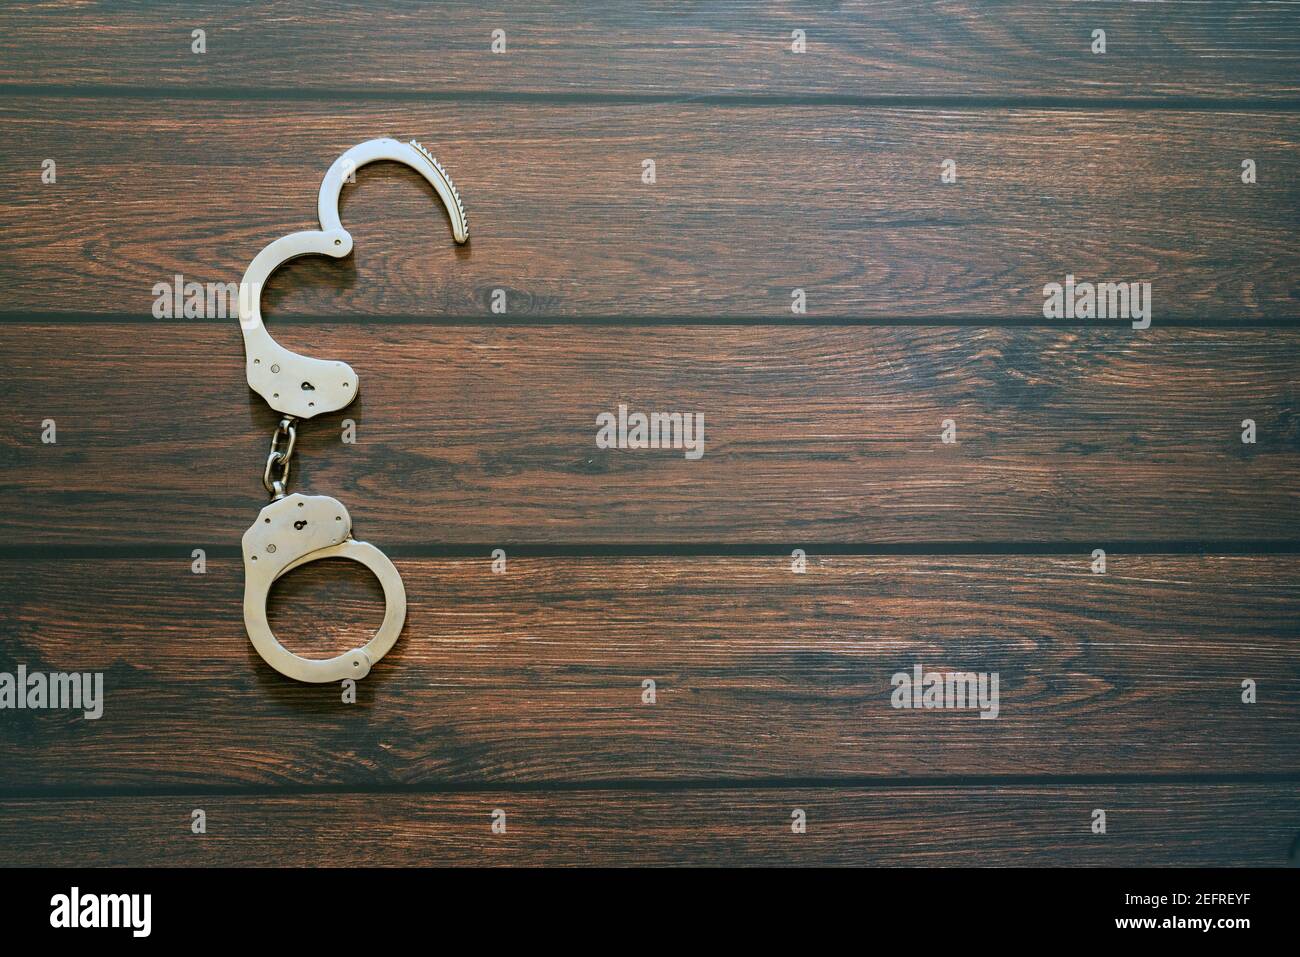 Handcuffs with an open part on a wooden board Stock Photo